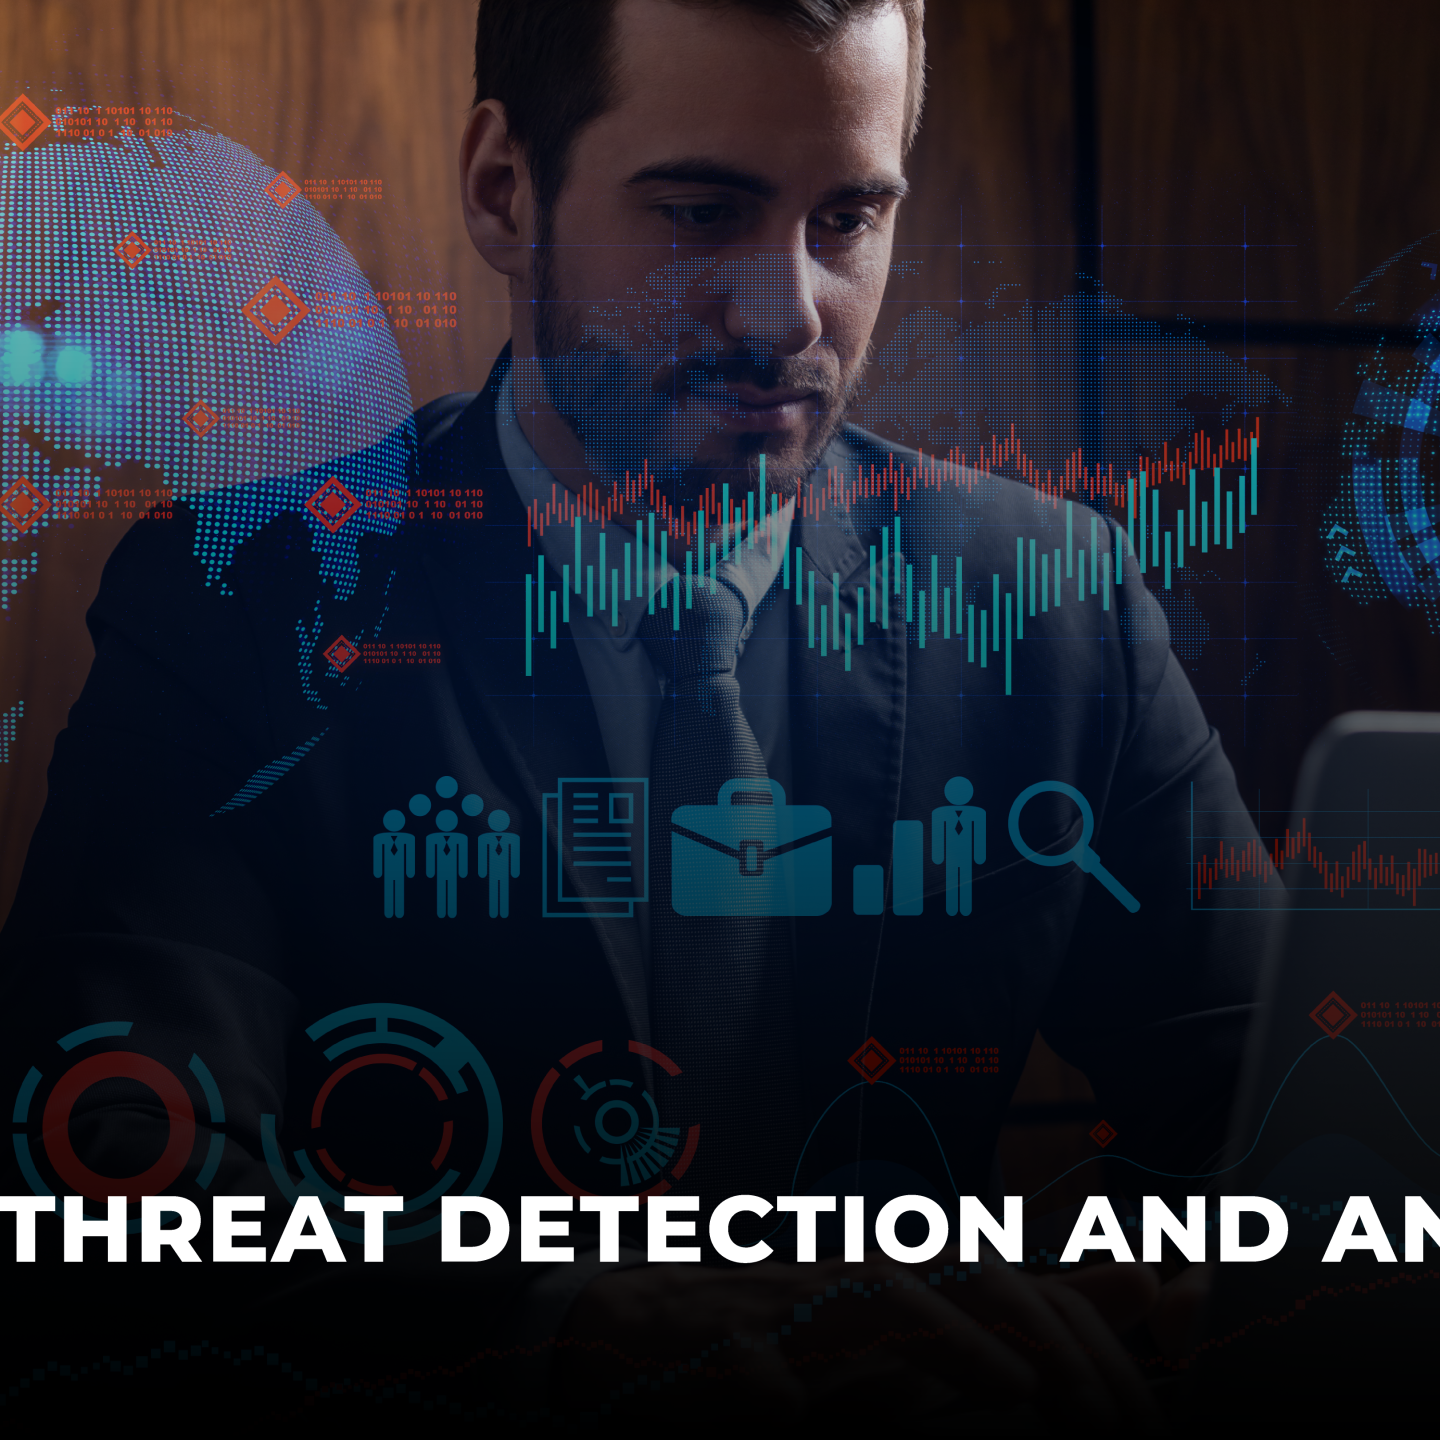 AI for threat detection and analysis